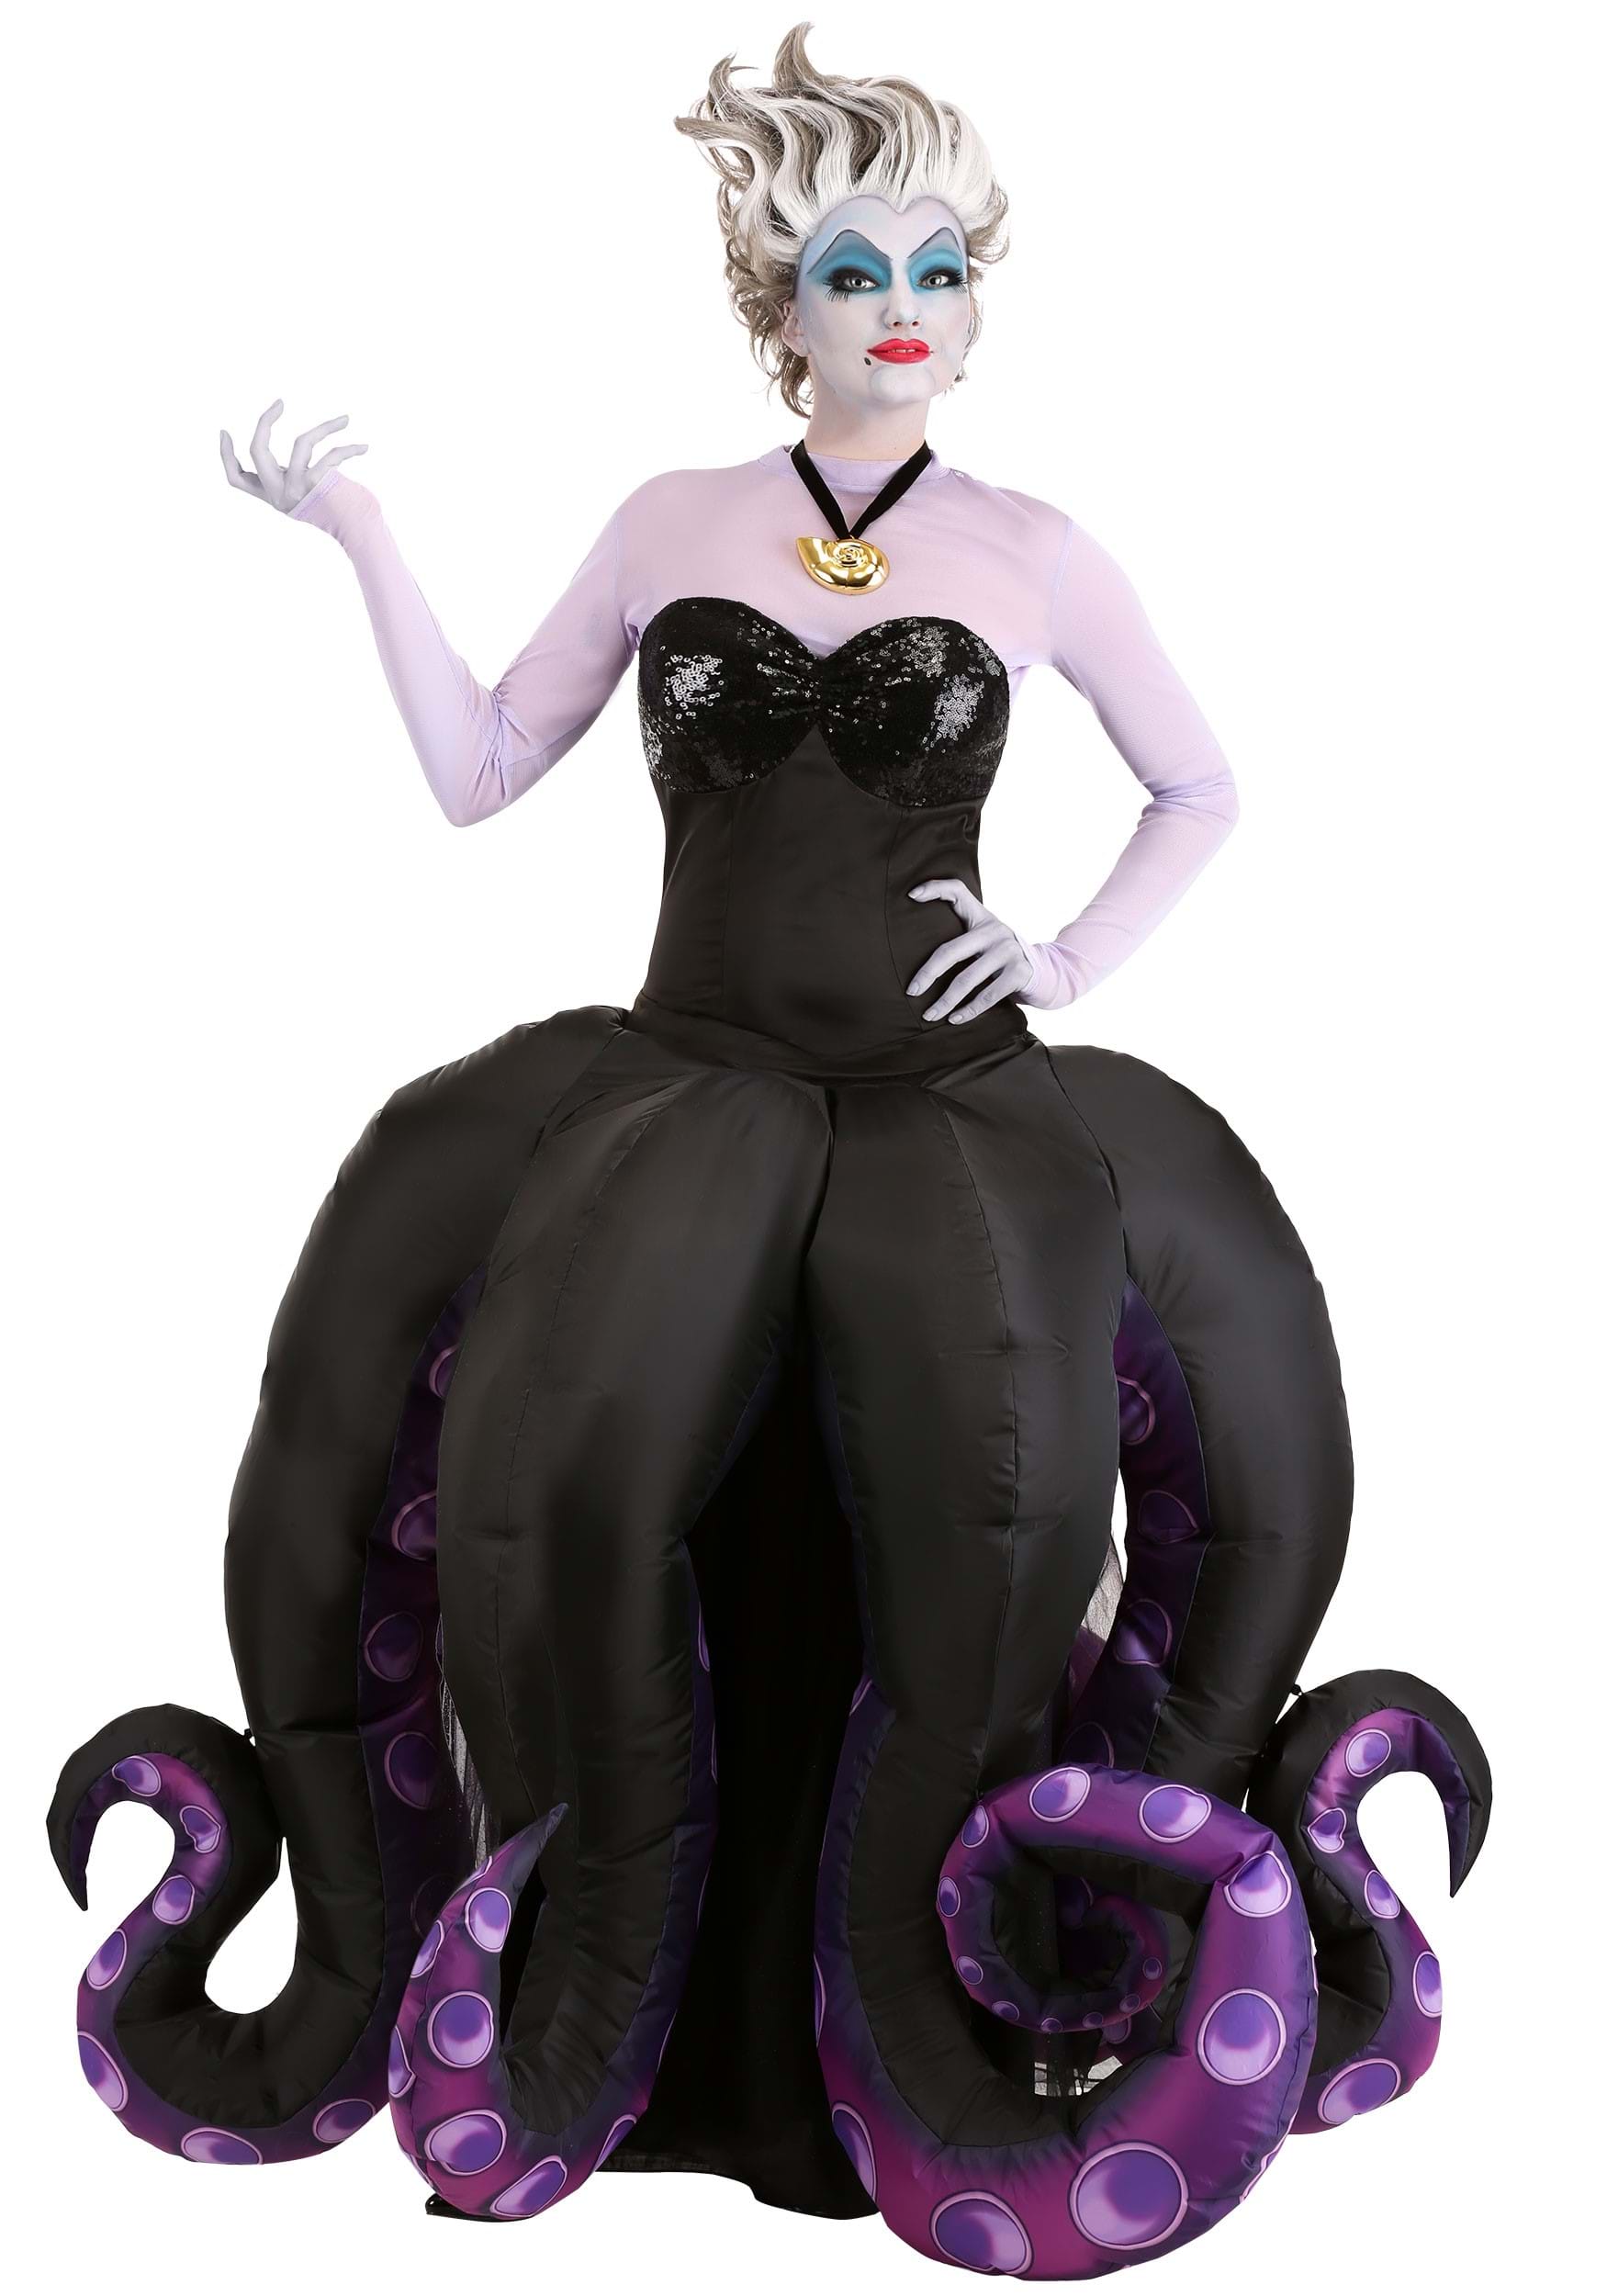 Image of Disguise Limited Little Mermaid Ursula Prestige Costume for Women